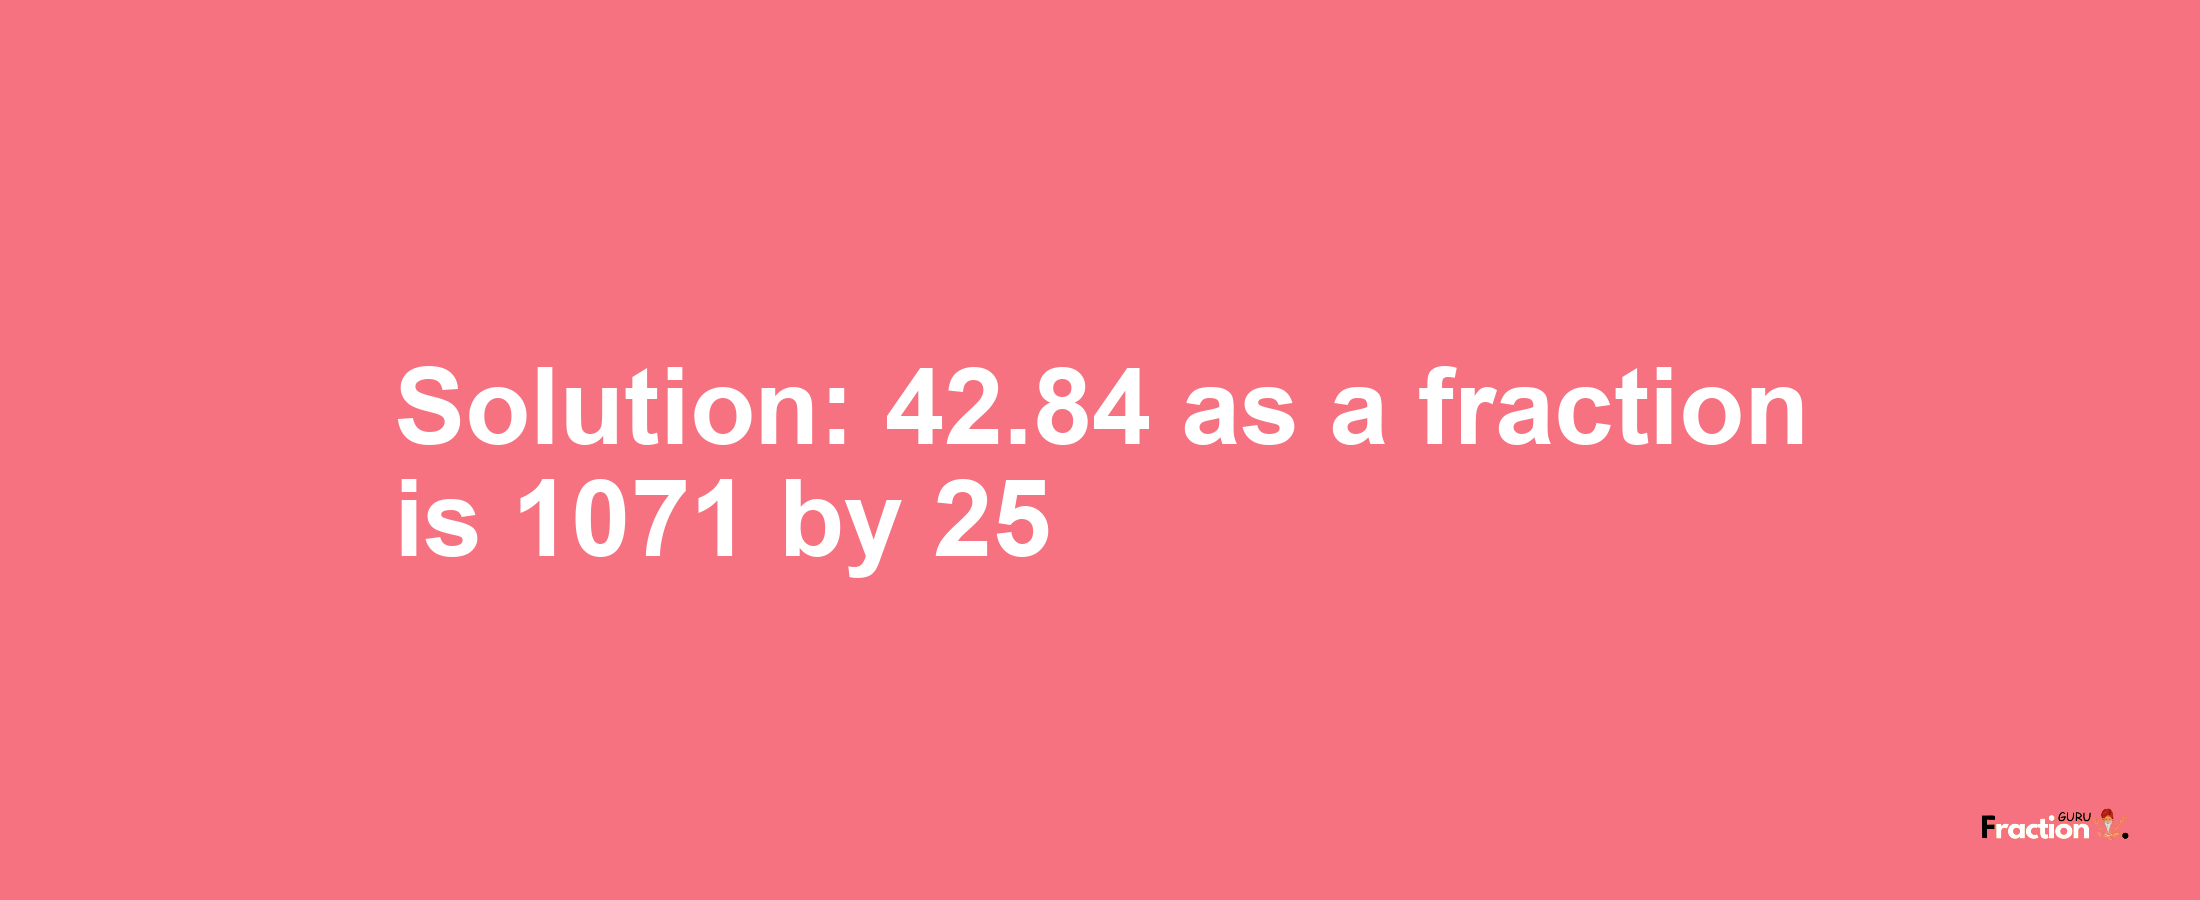 Solution:42.84 as a fraction is 1071/25